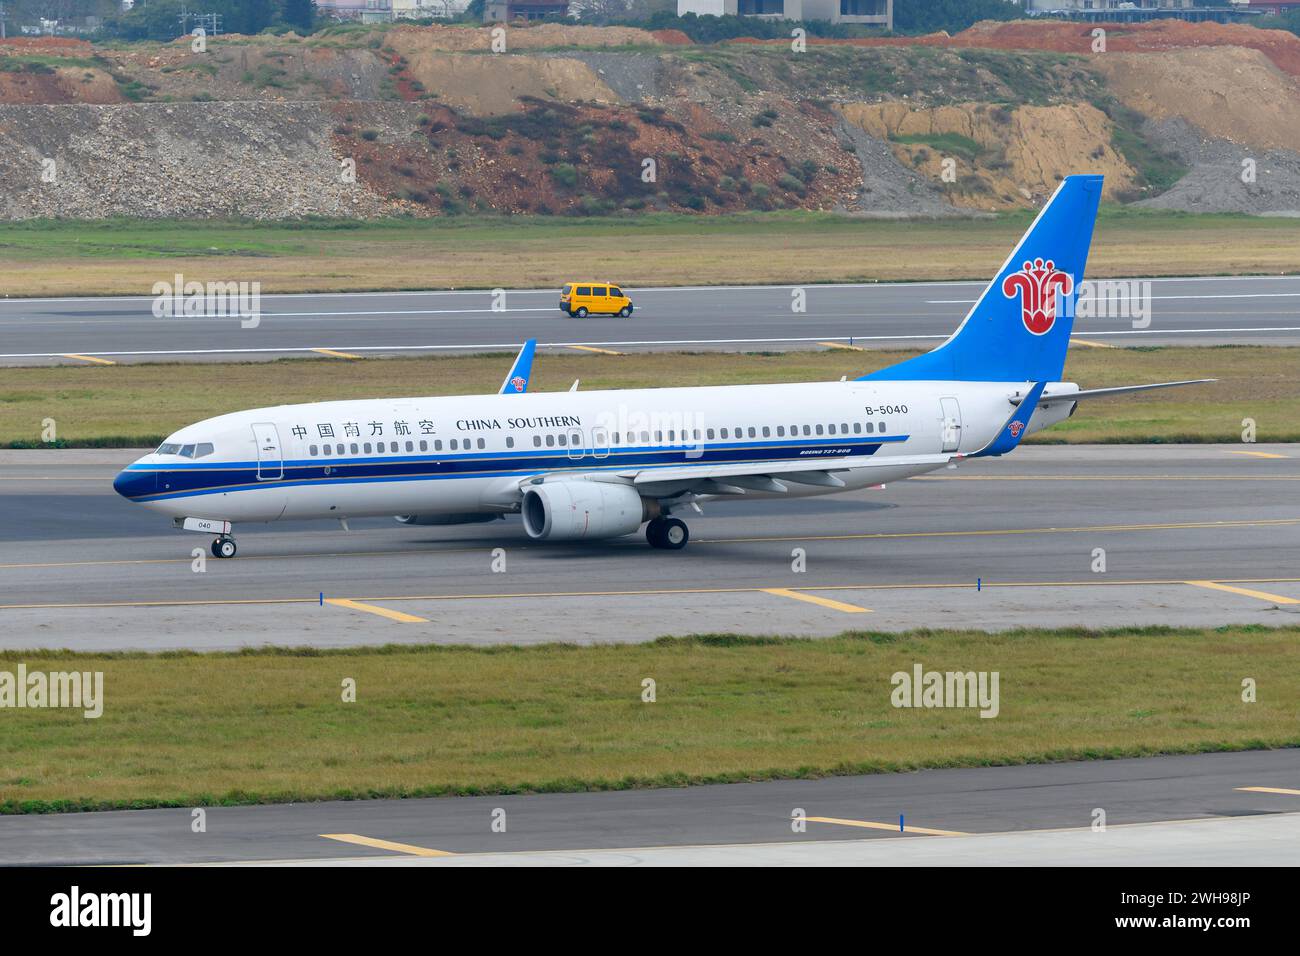 China Southern Airlines Boeing 737 aircraft taxiing. Airplane Boeing 737-800 of China Southern airline. Stock Photo